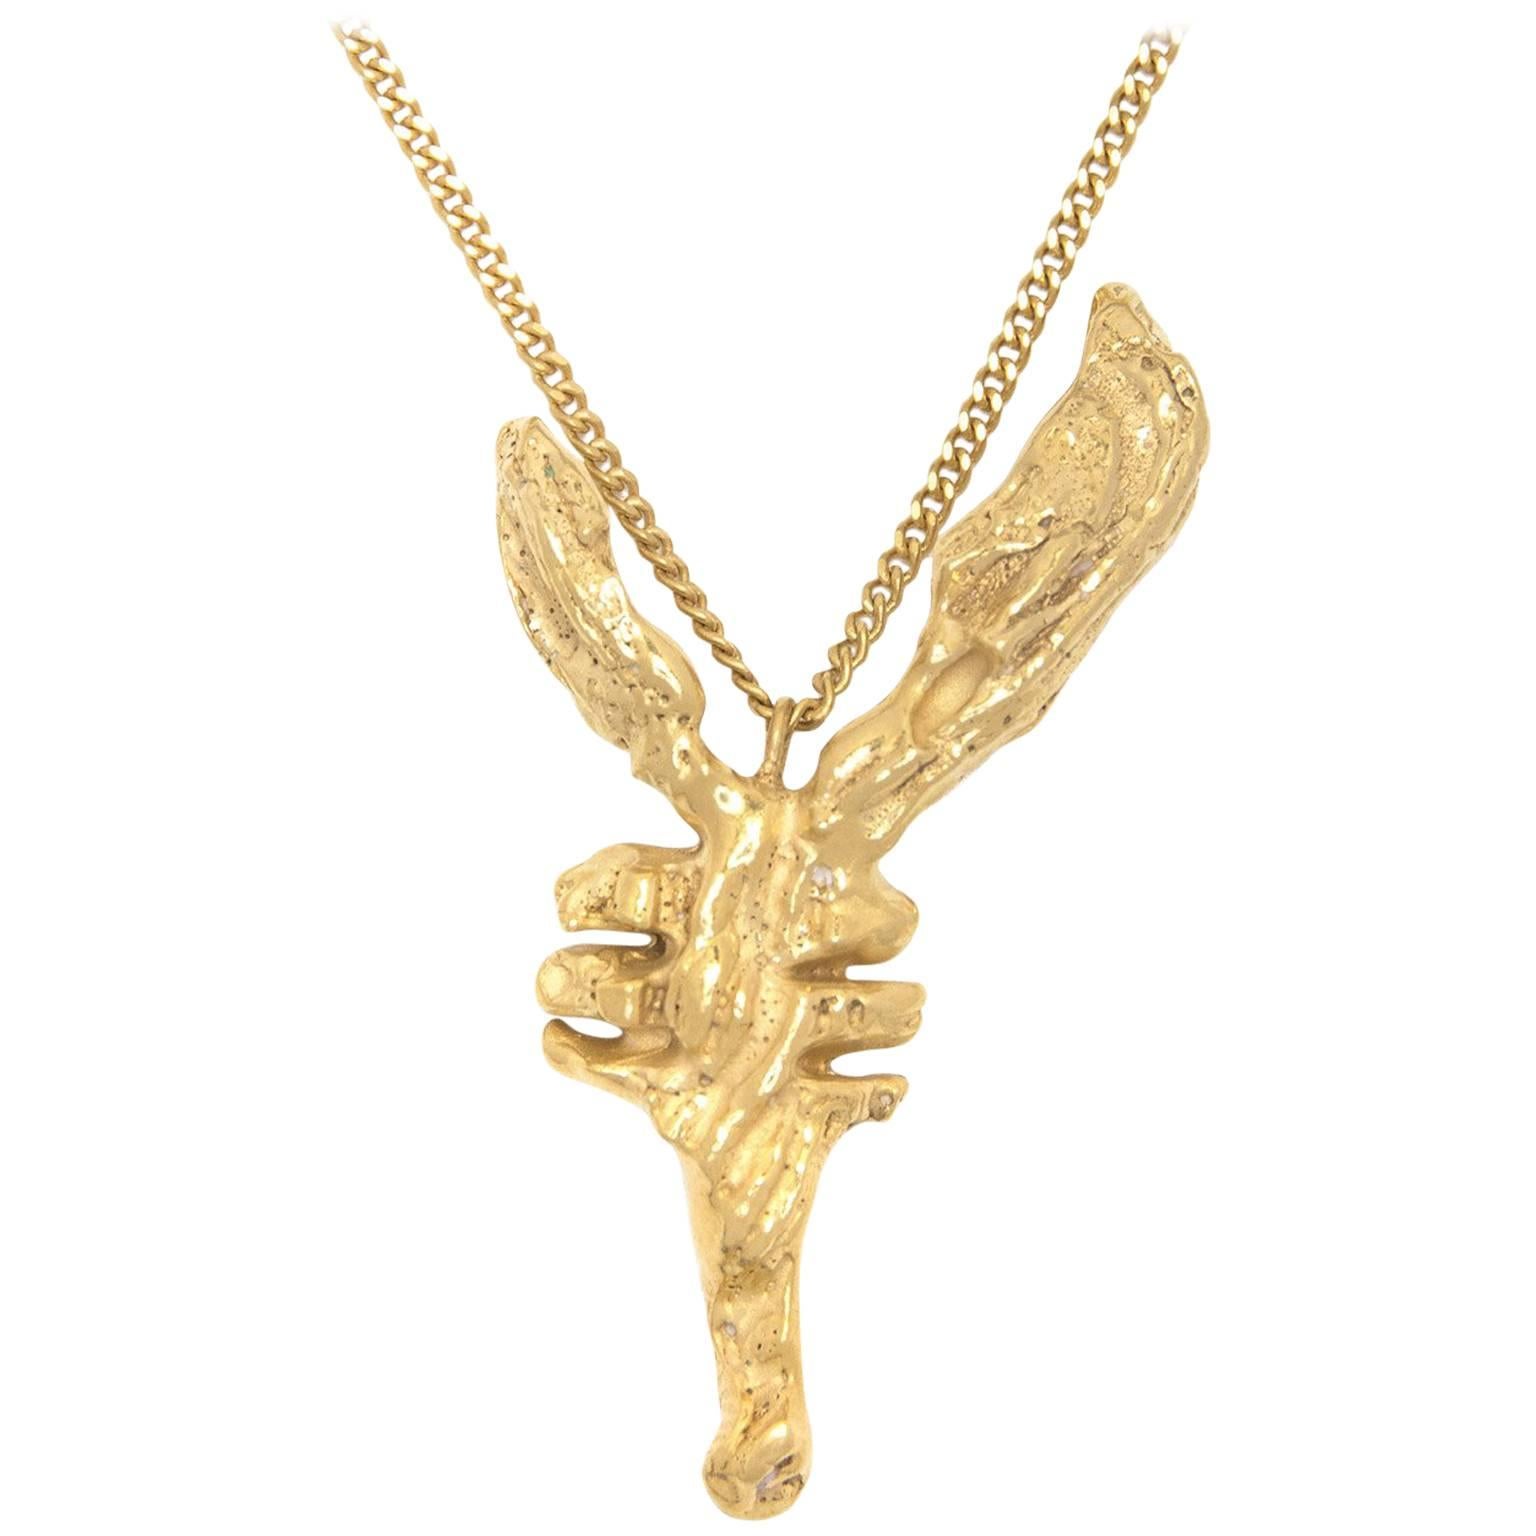 Loveness Lee - Chinese Zodiac Goat - Sheep, Ram Horoscope Gold Pendant Necklace For Sale